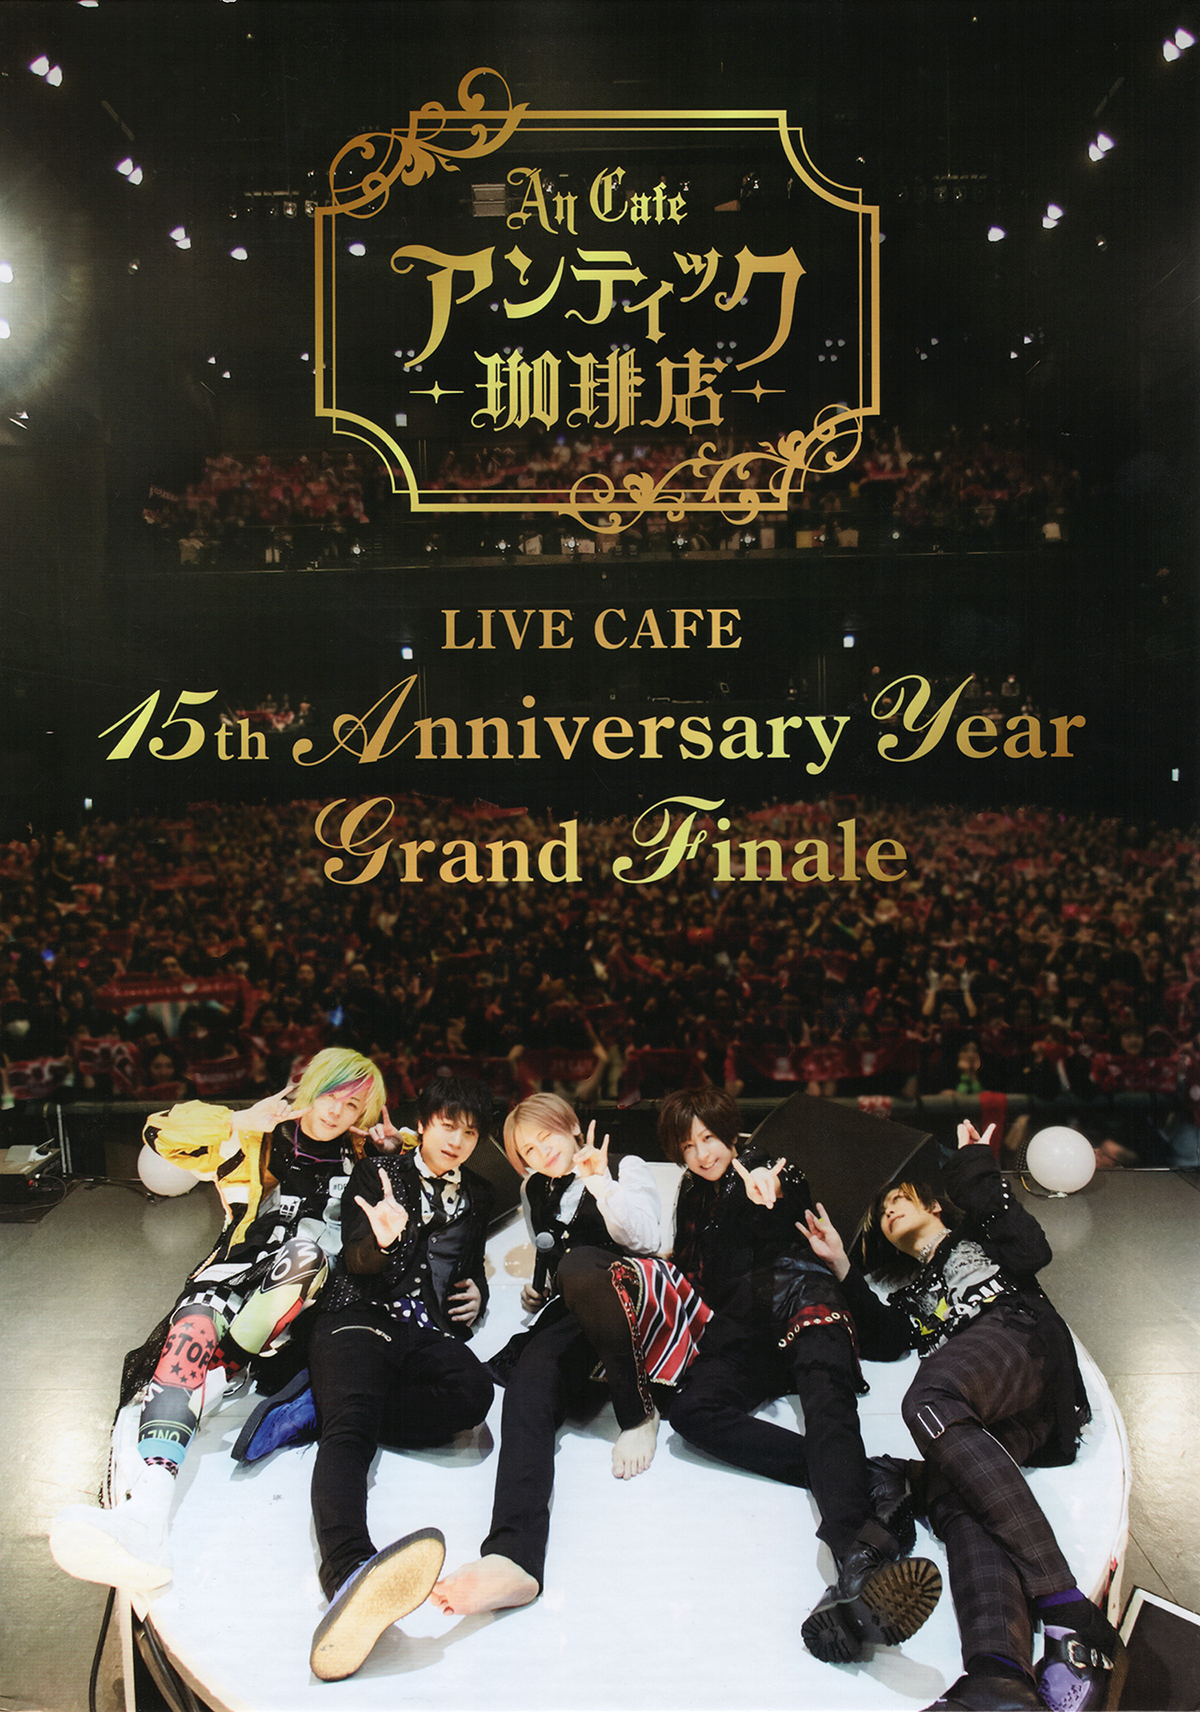 LIVE CAFE 15th Anniversary Year Grand Finale - AN CAFE | vkgy